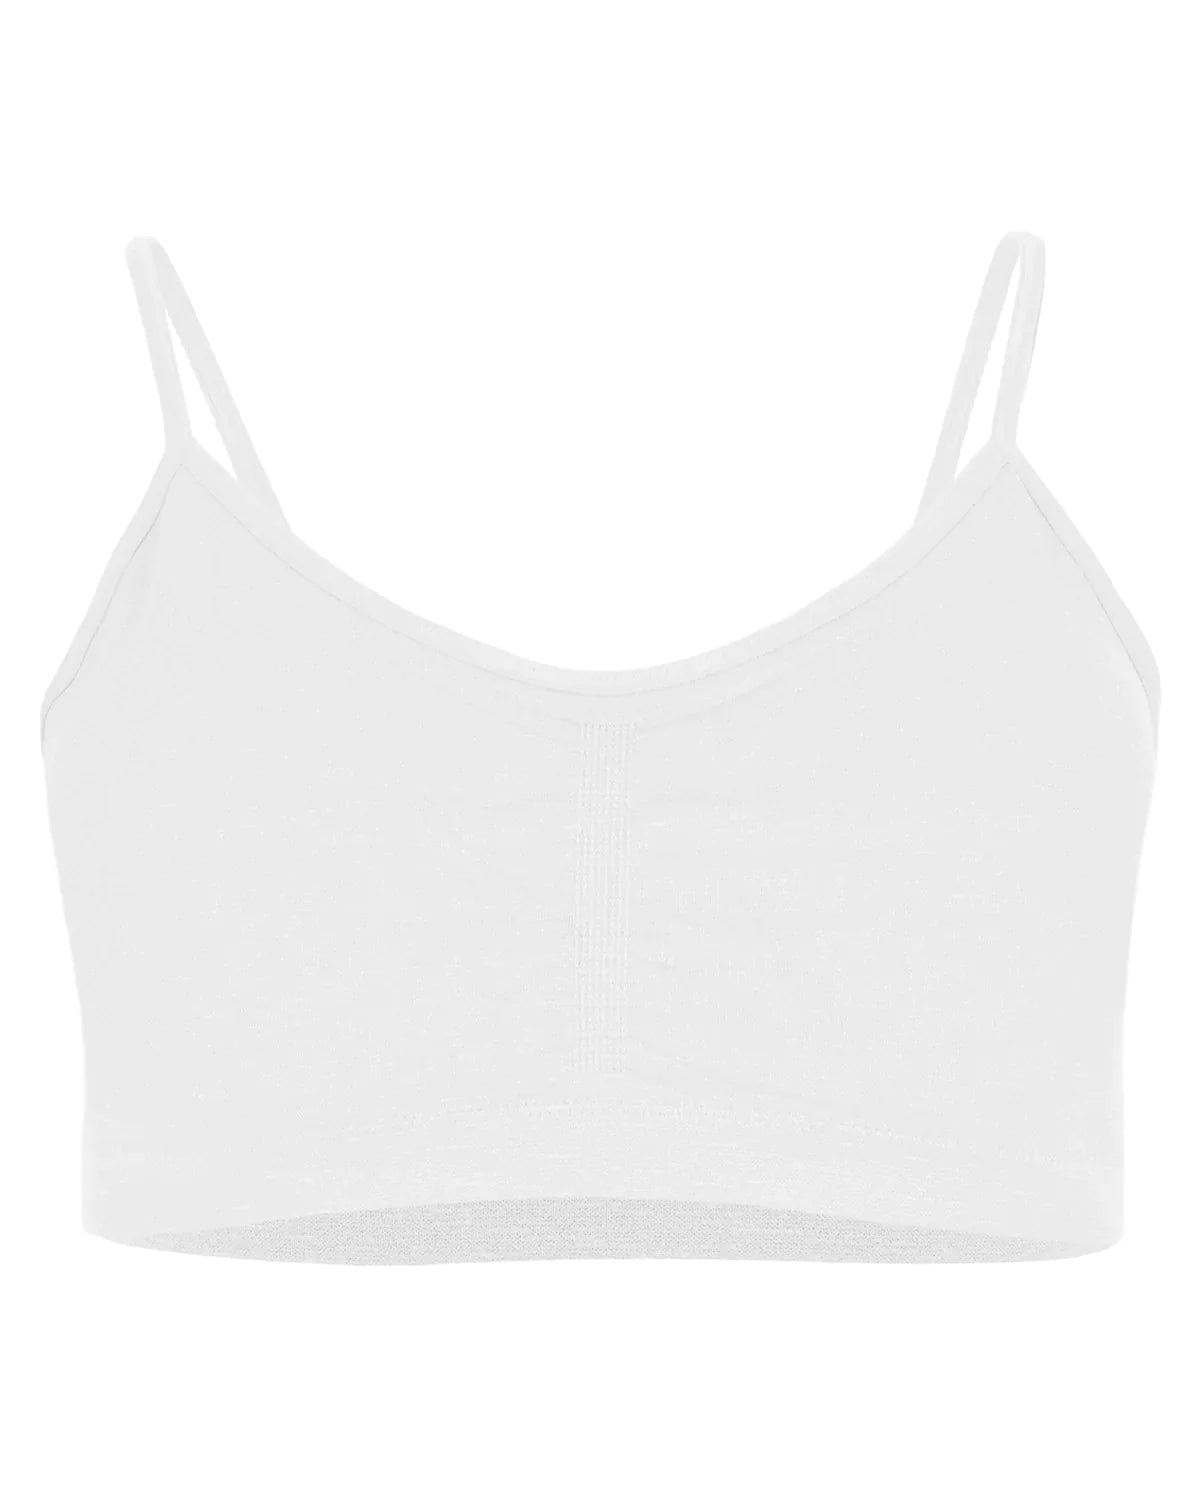 2 Pack Gathered Front Cup Training Bra